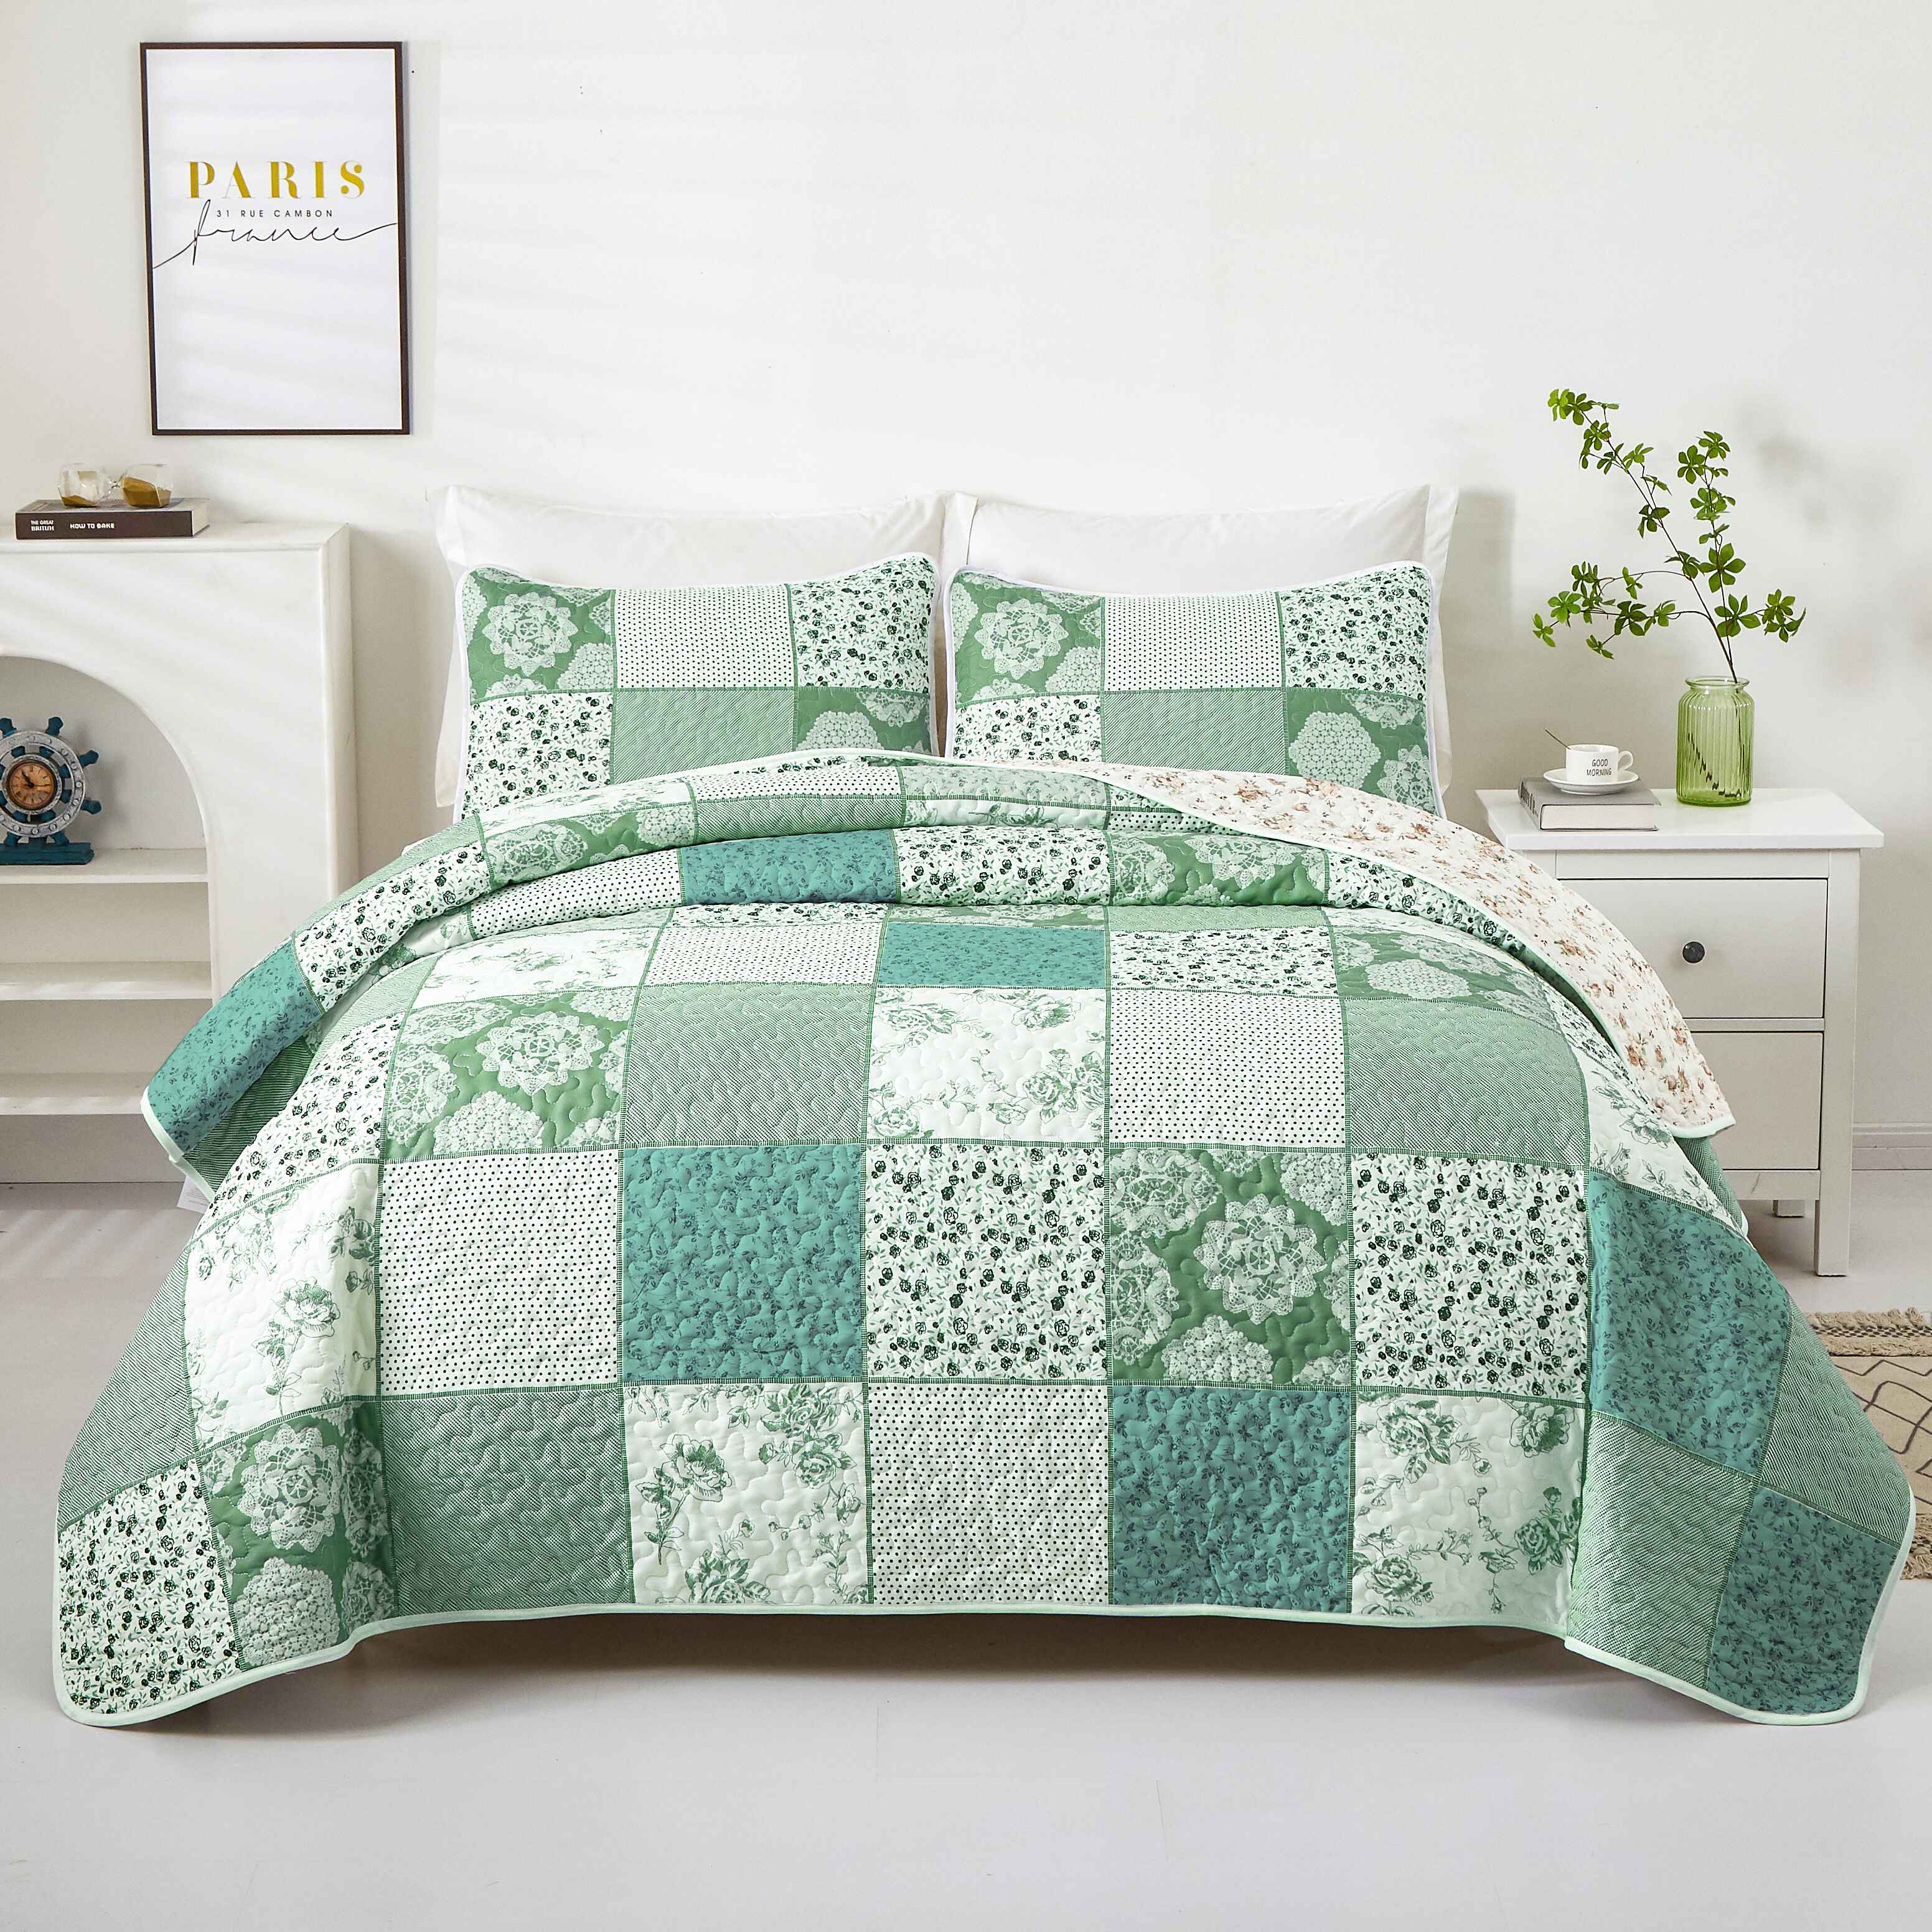 11 Floral Quilt Cover Sets to Add Subtle Drama